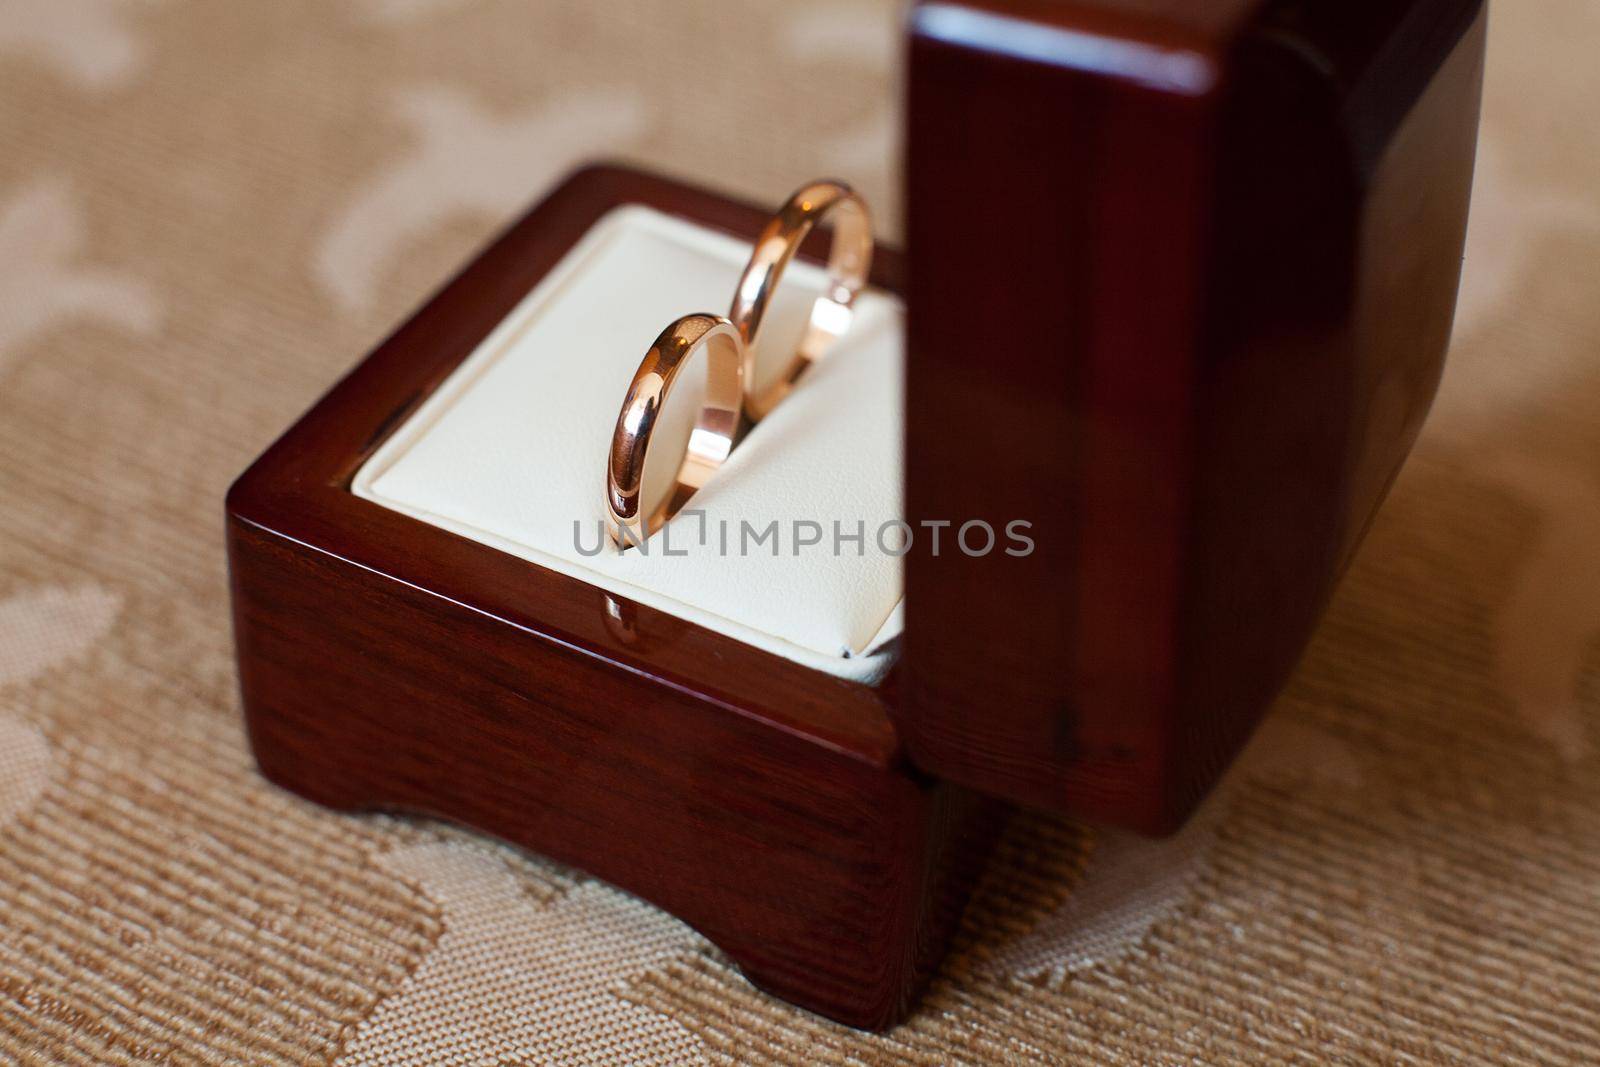 Elegant gold wedding rings in a wooden box.